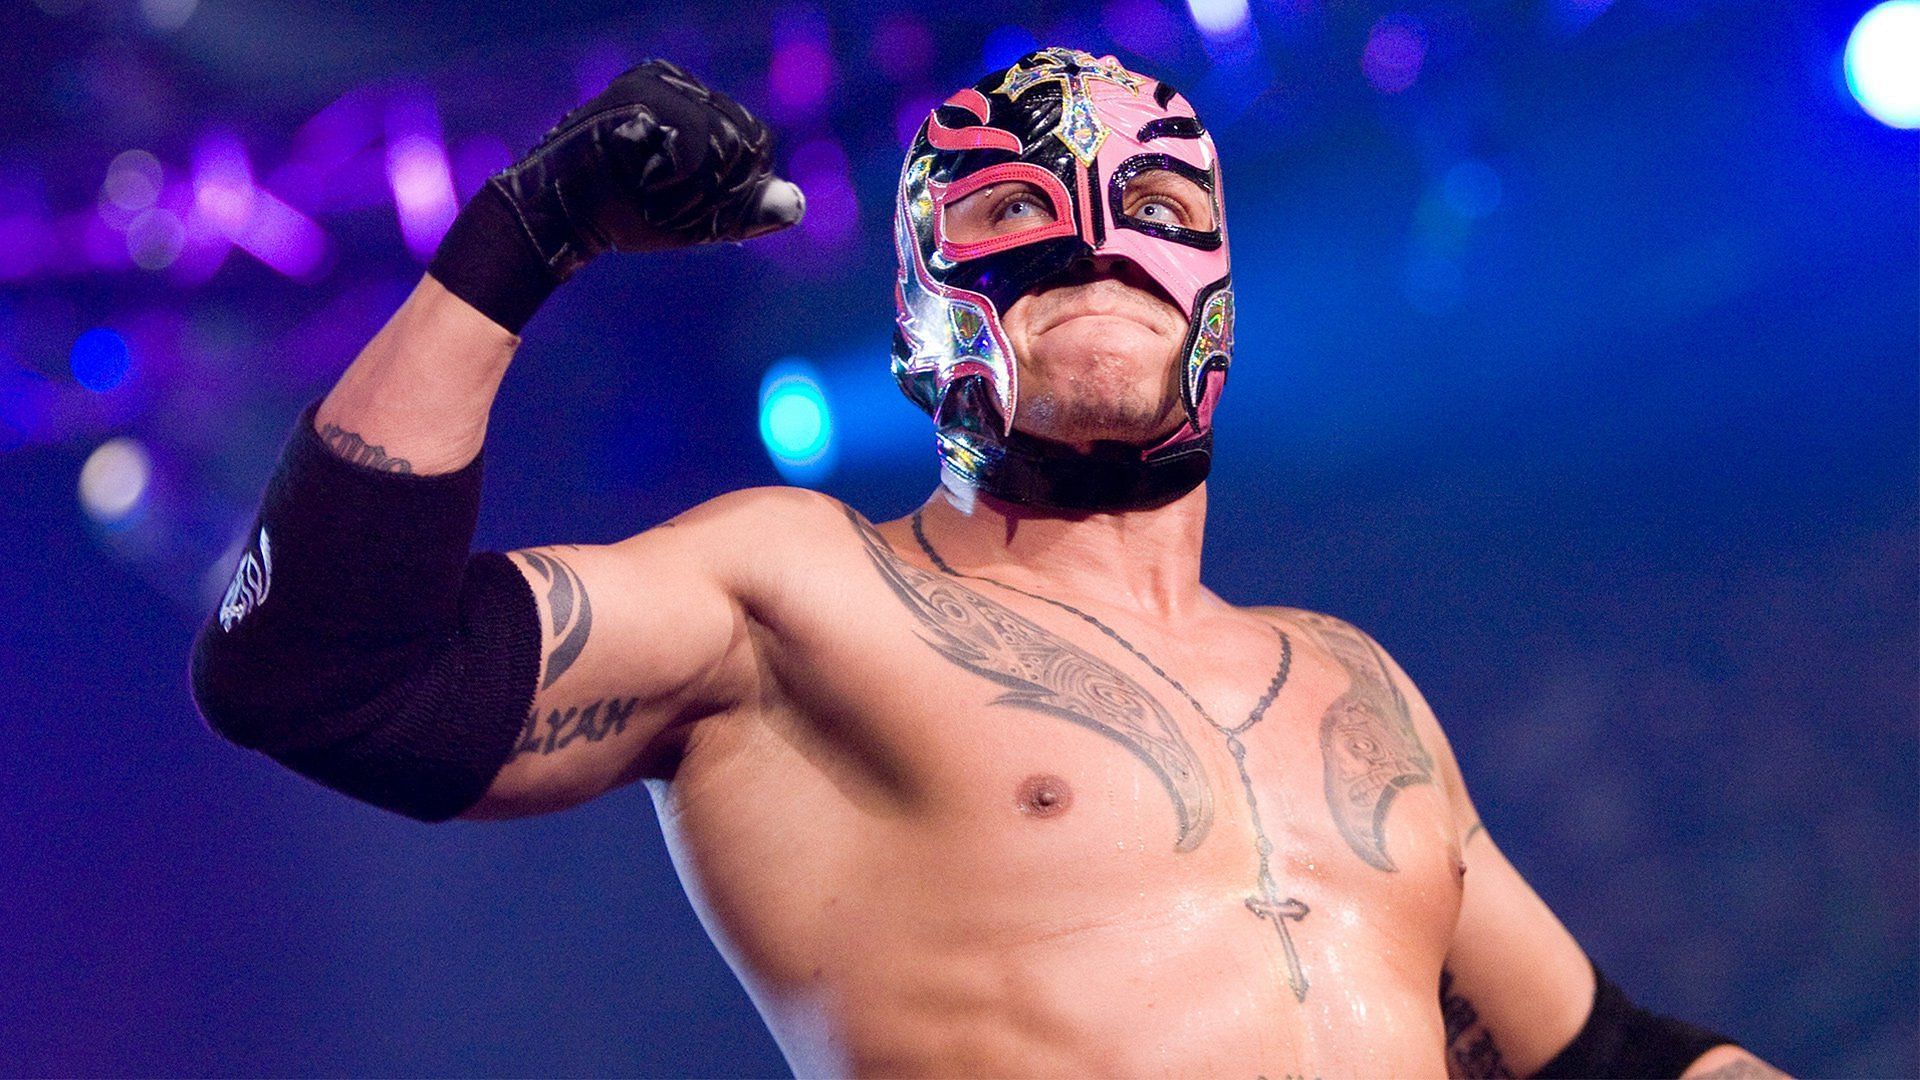 Rey Mysterio moved to SmackDown last year